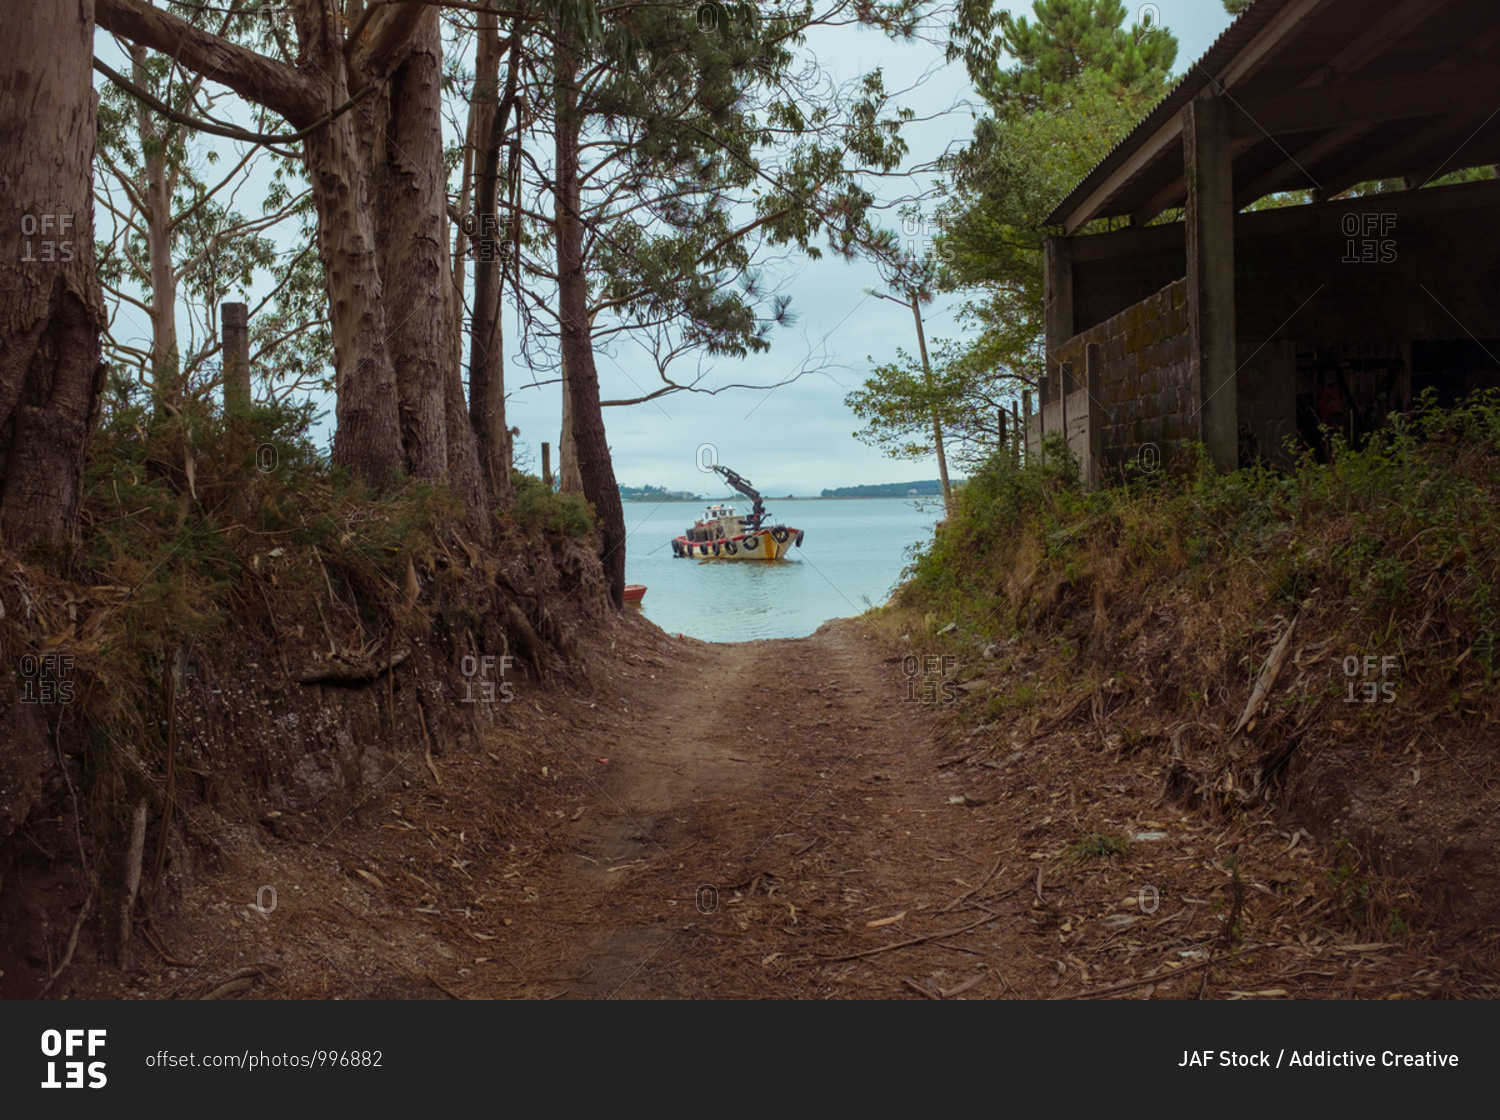 Dry walkway passing between trees with thick trunks and wooden house with motorized boat floating on river under serene sky